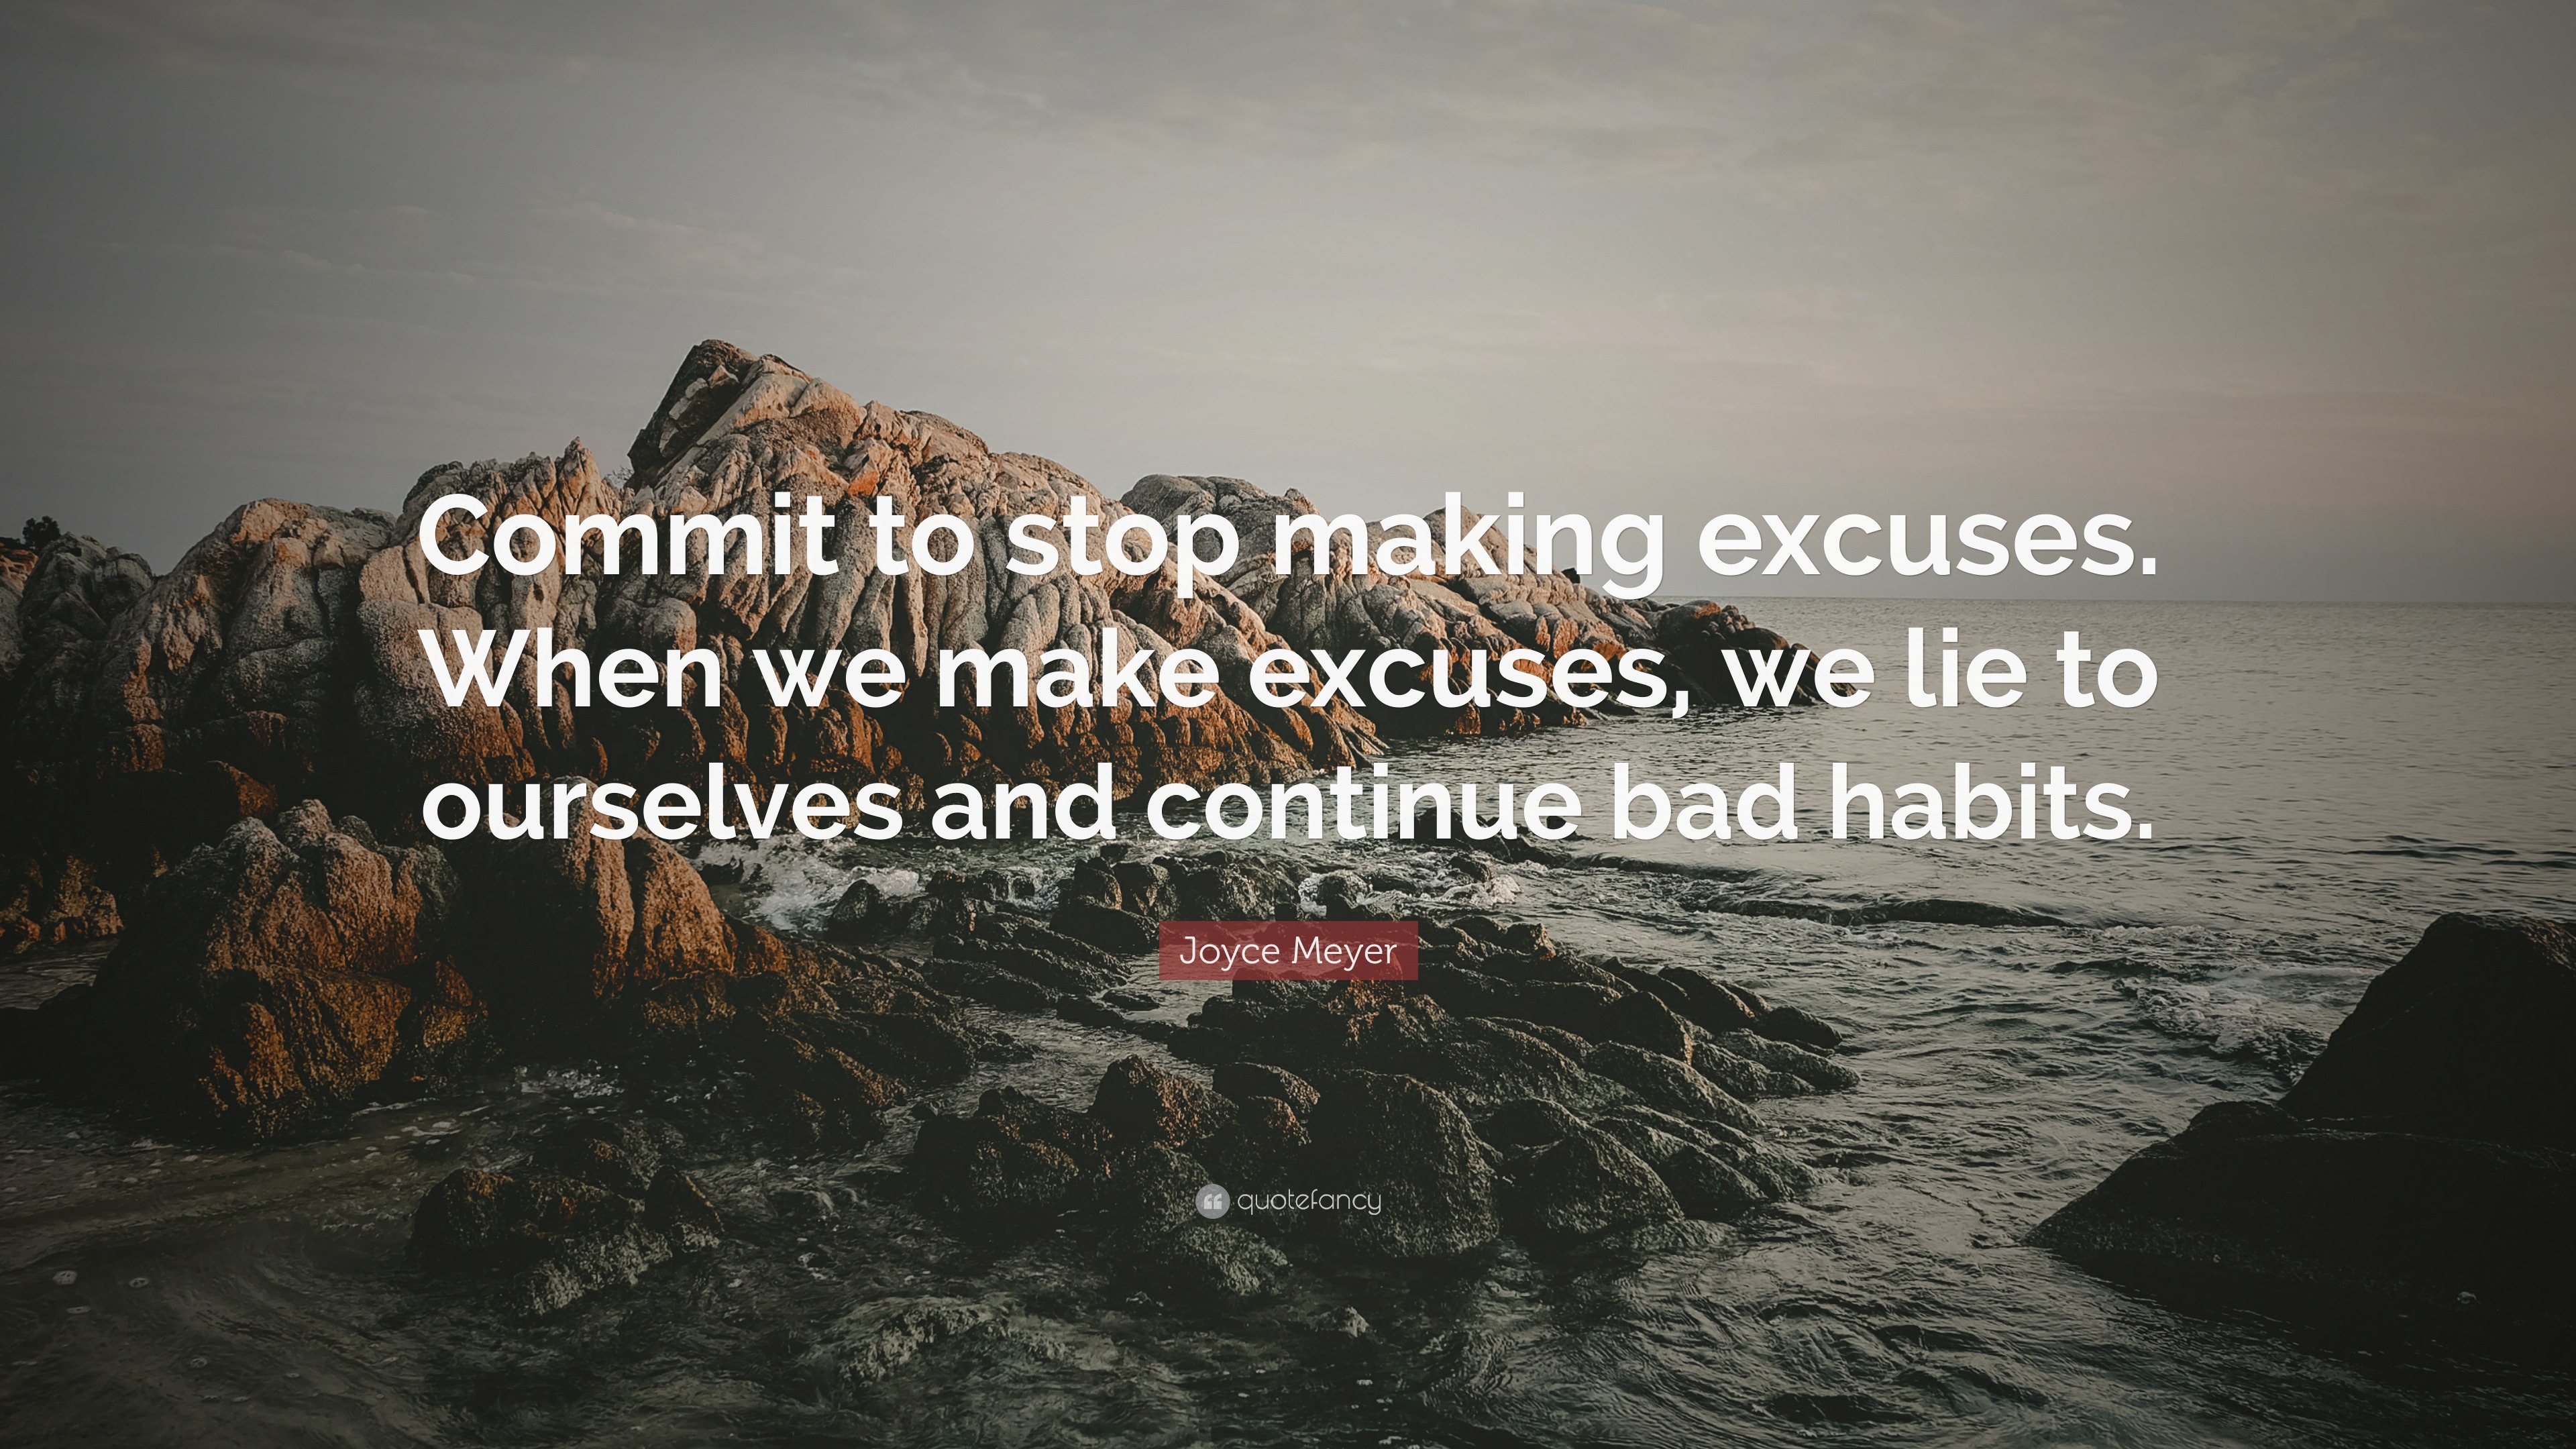 Joyce Meyer Quote “commit To Stop Making Excuses When We Make Excuses